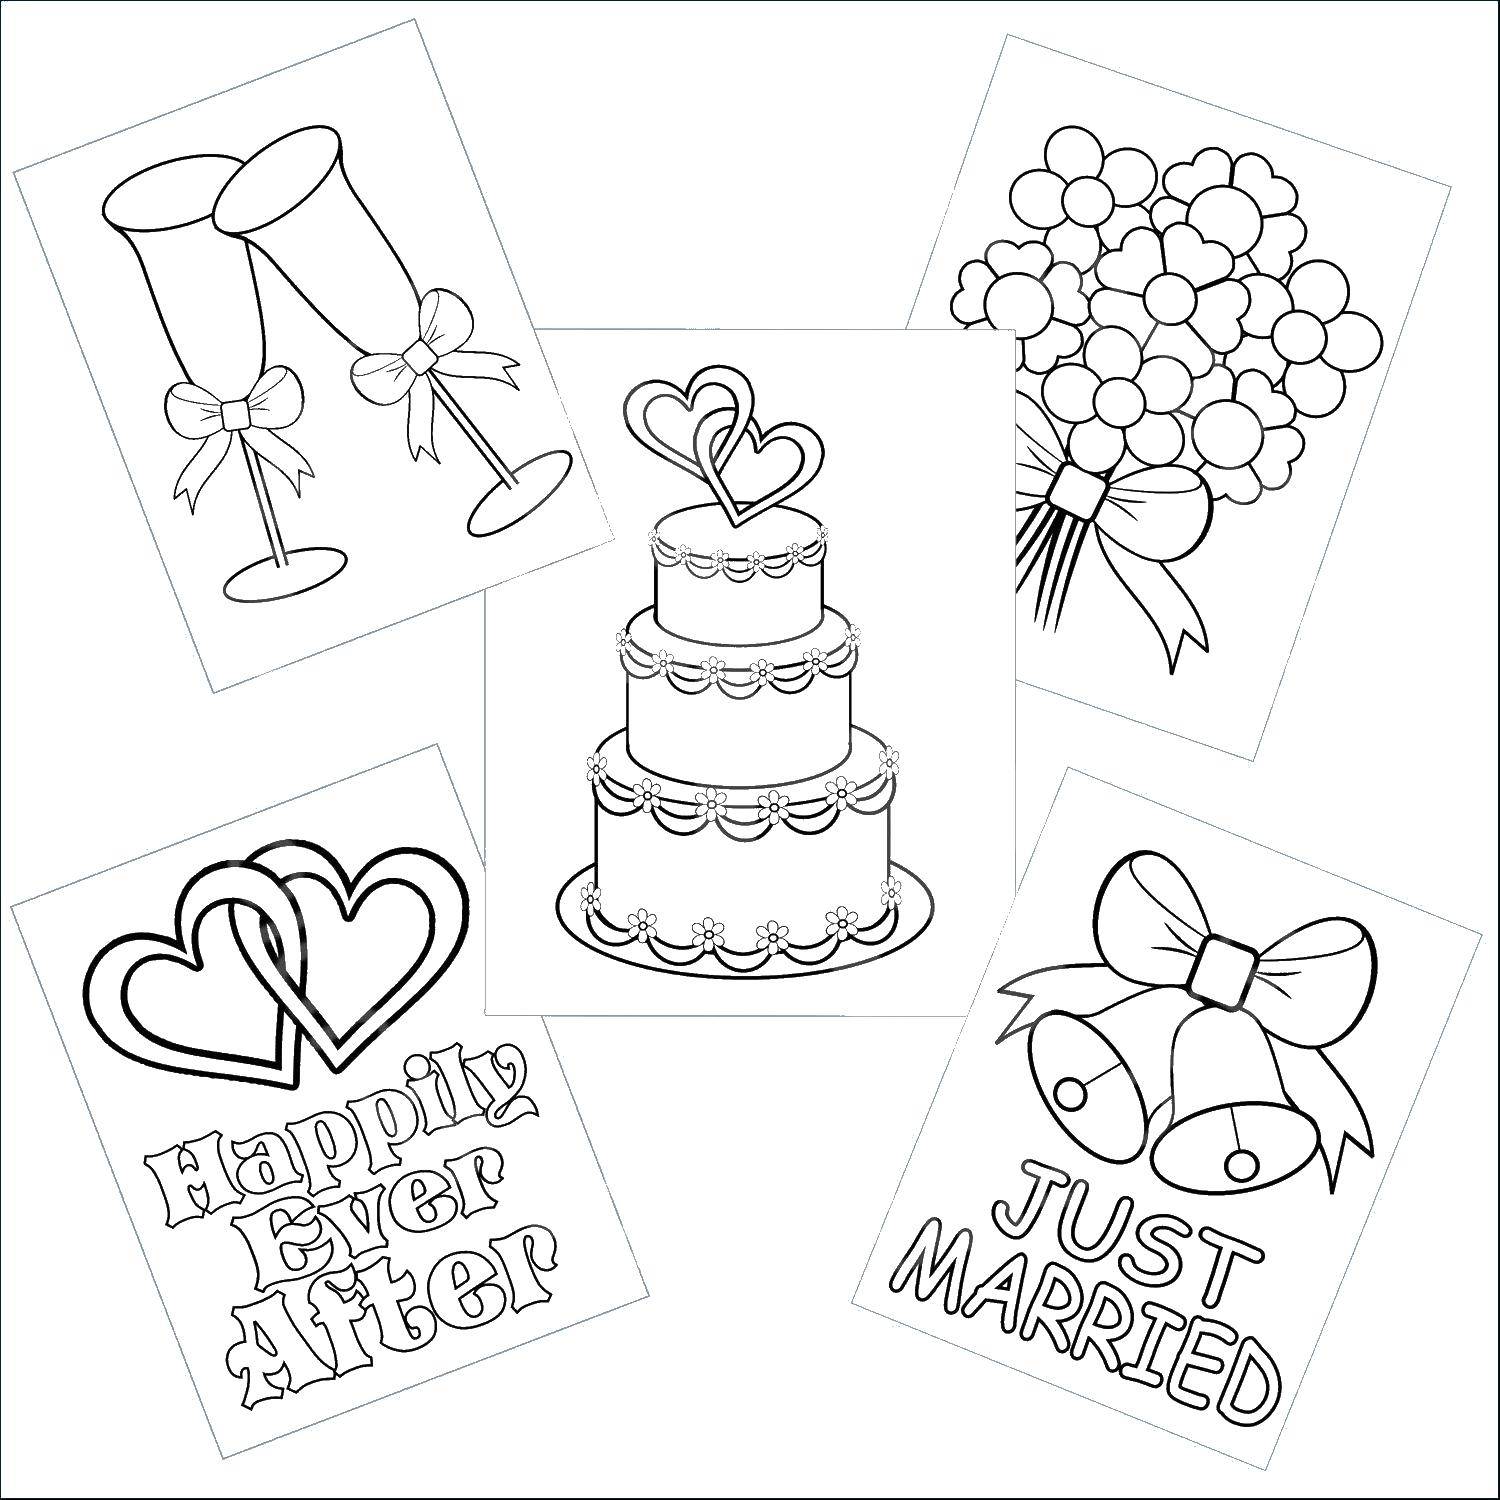 Coloring Wedding attributes. Category Wedding. Tags:  wedding, dress, bouquet.